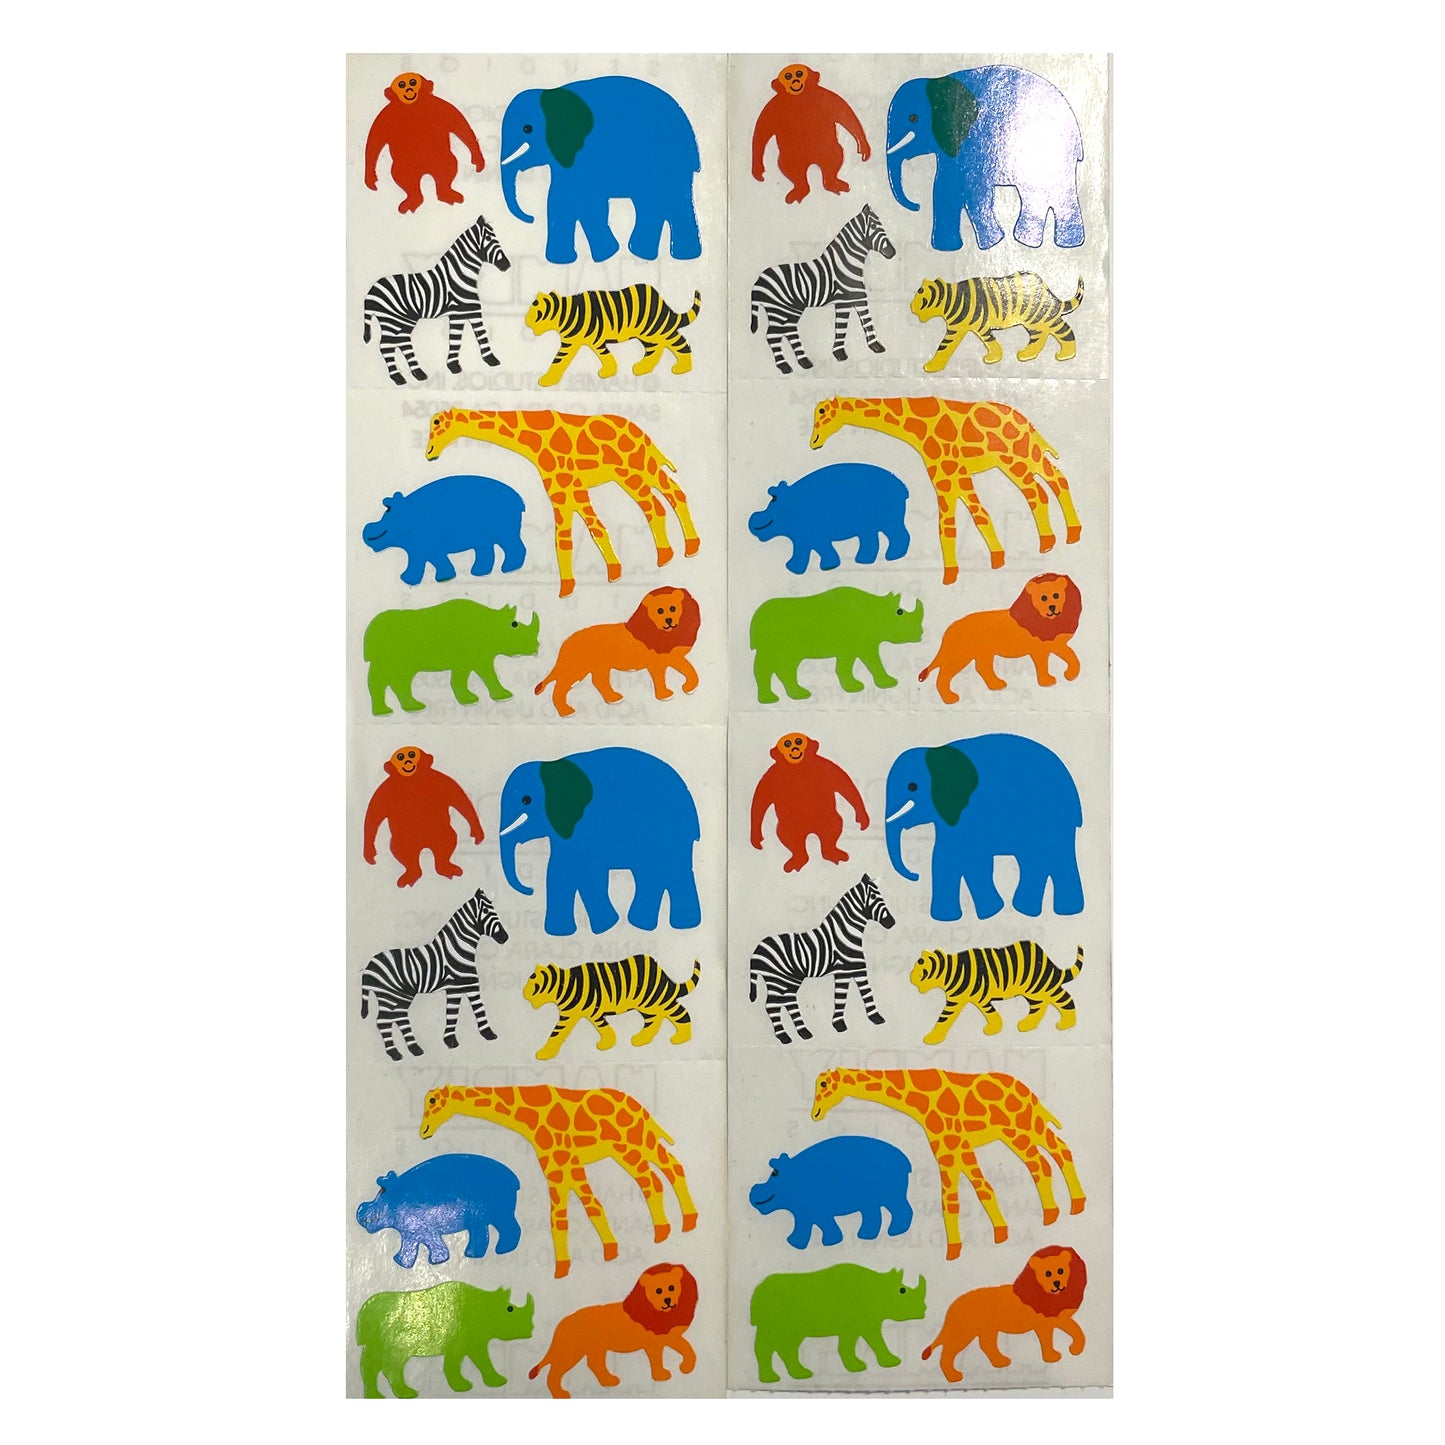 HAMBLY: Paper Zoo Animals stickers